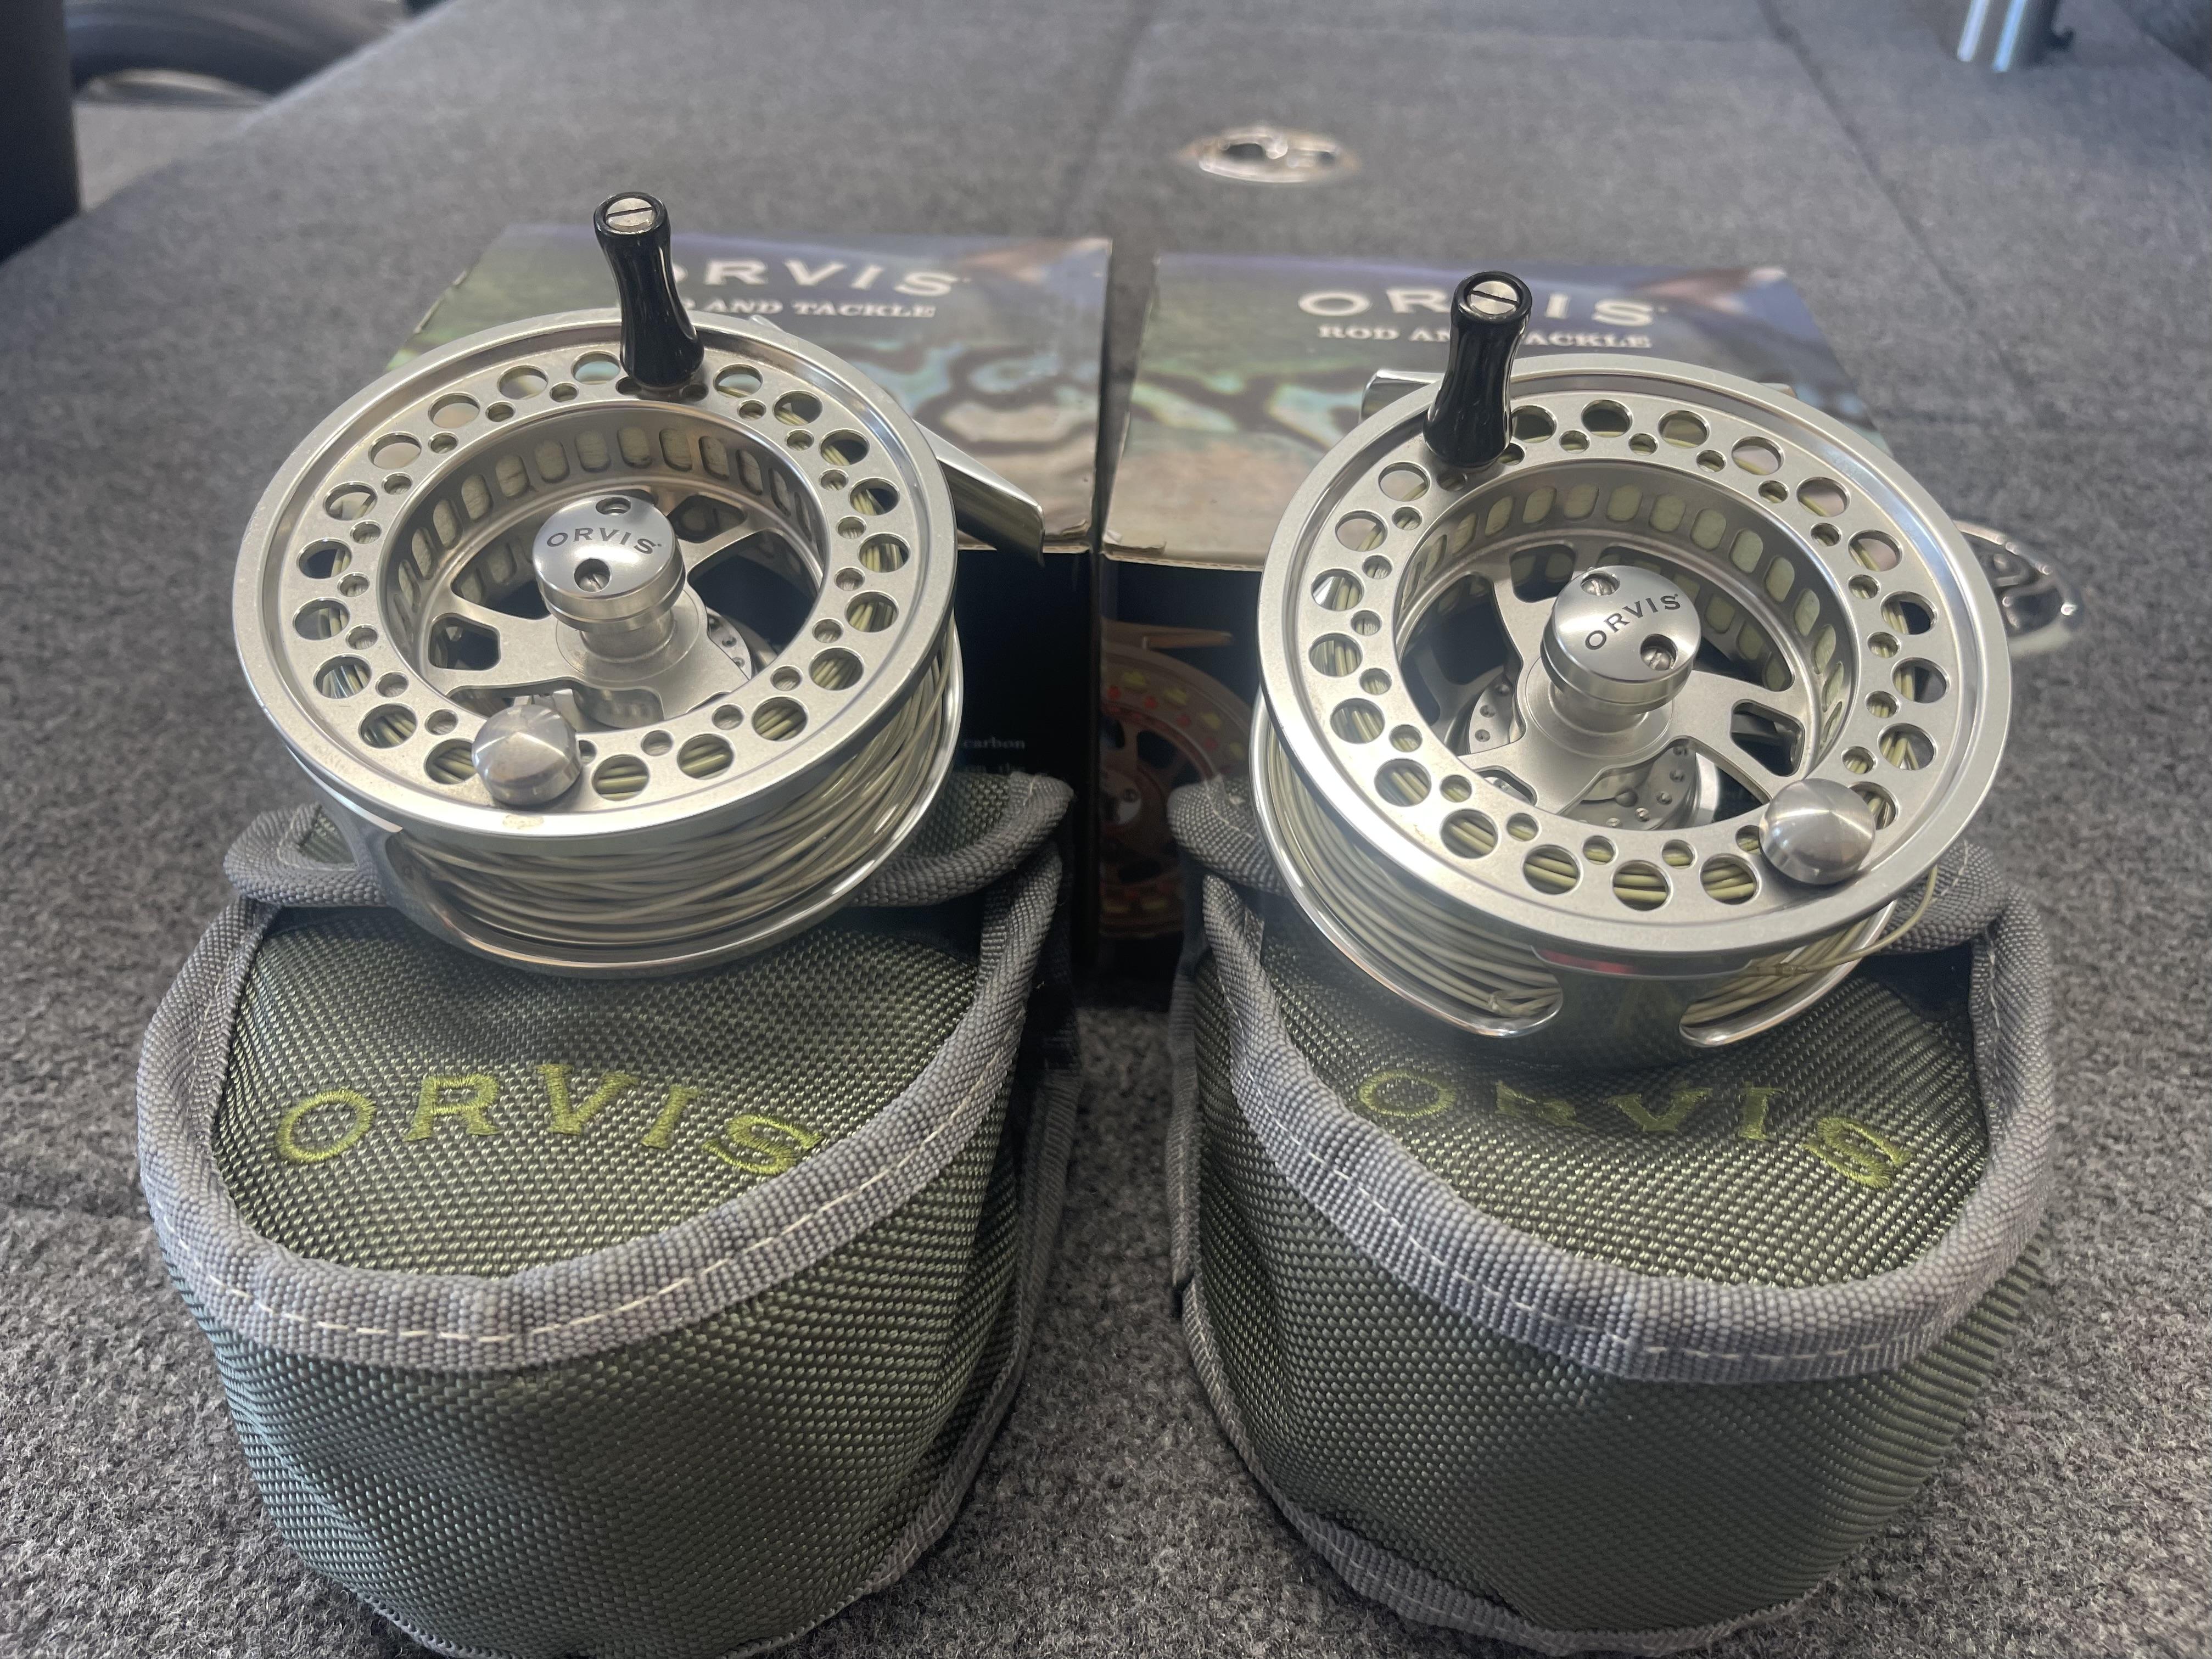 Orvis Battenkill Large Arbor III - Made in England Fly Fishing Reel 